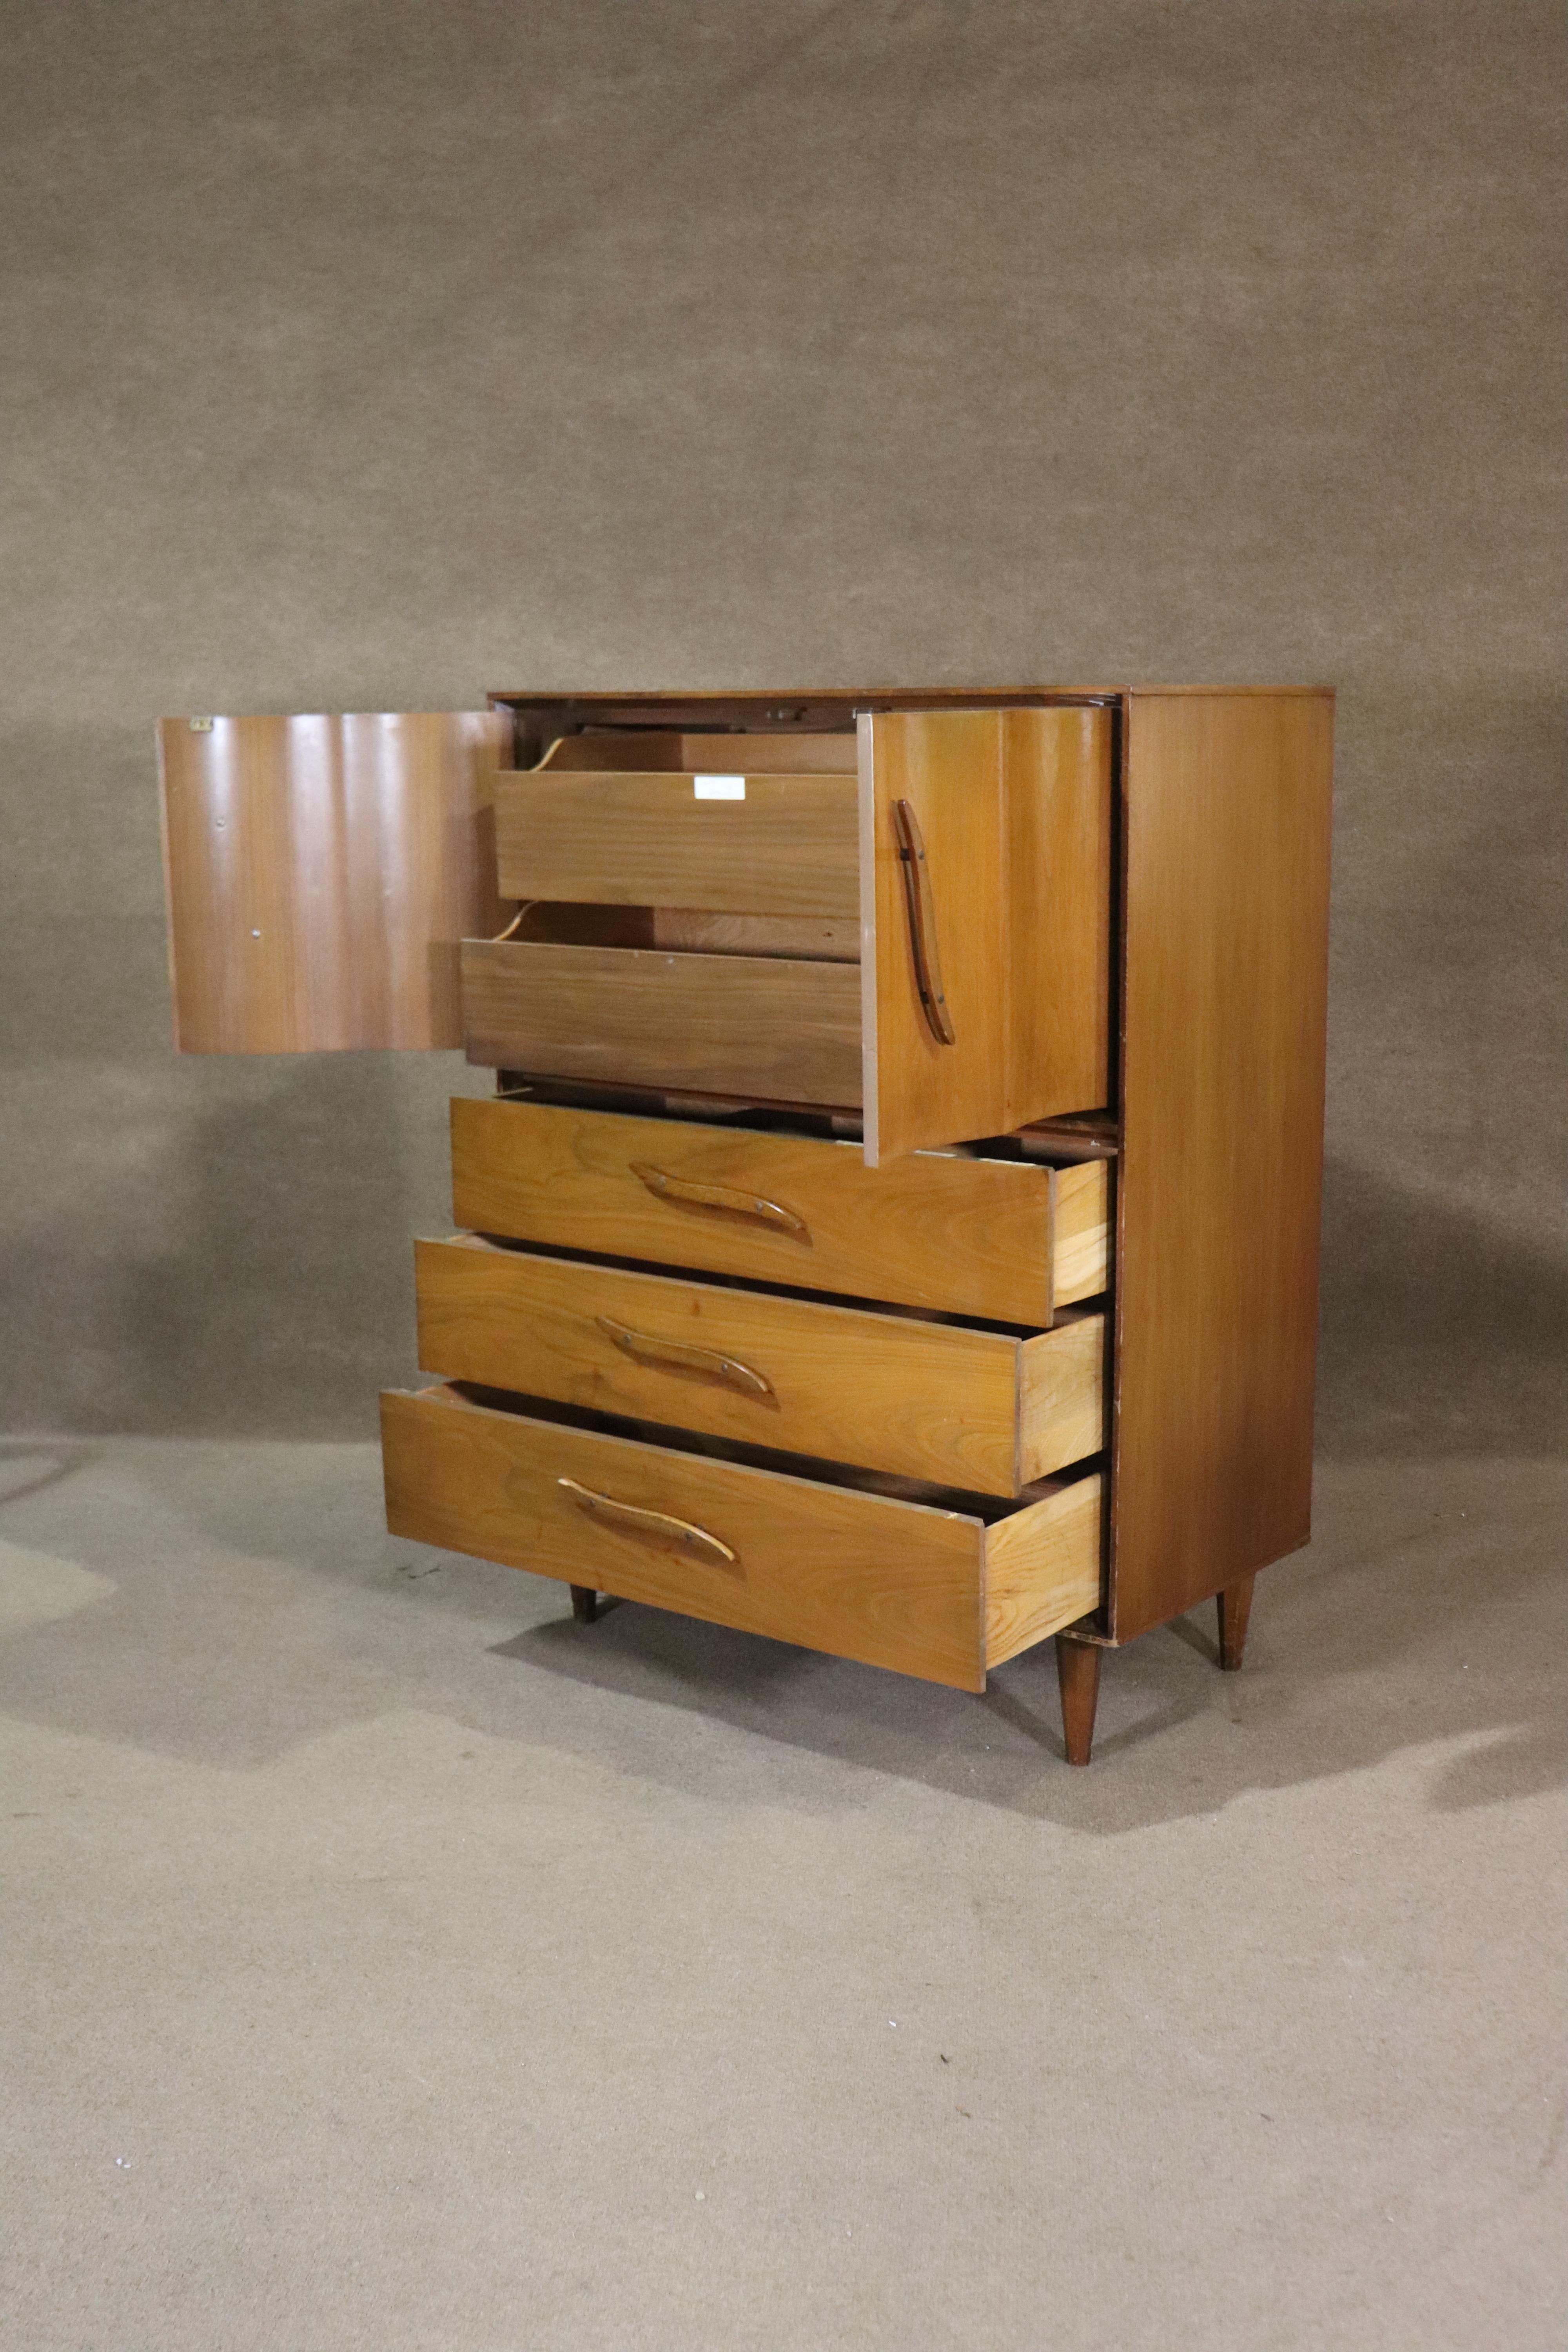 Mid-century modern tall chest of drawers made by Unagusta Furniture. Five wide drawers, two hidden by wavy doors, with sculpted wood handles.
Please confirm location NY or NJ